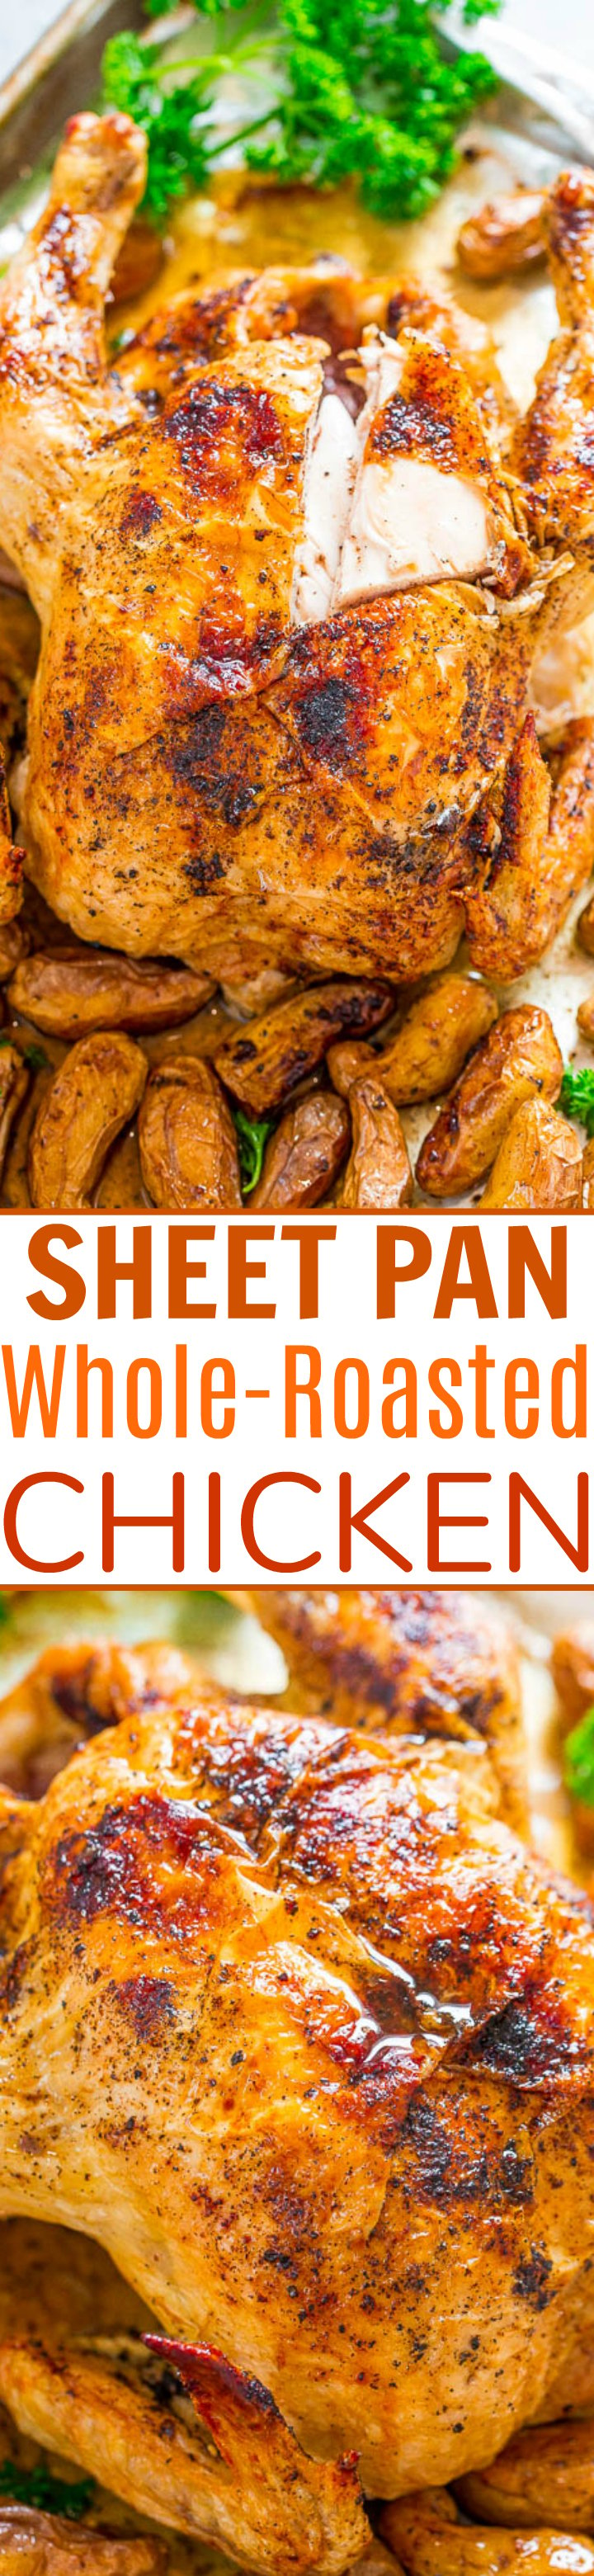 Sheet Pan Whole-Roasted Chicken and Potatoes — FOUR ingredients + ONE pan = PERFECT roasted chicken with ZERO cleanup!! Your new FOOLPROOF and EASY whole roasted chicken recipe that's ready in 1 hour!!